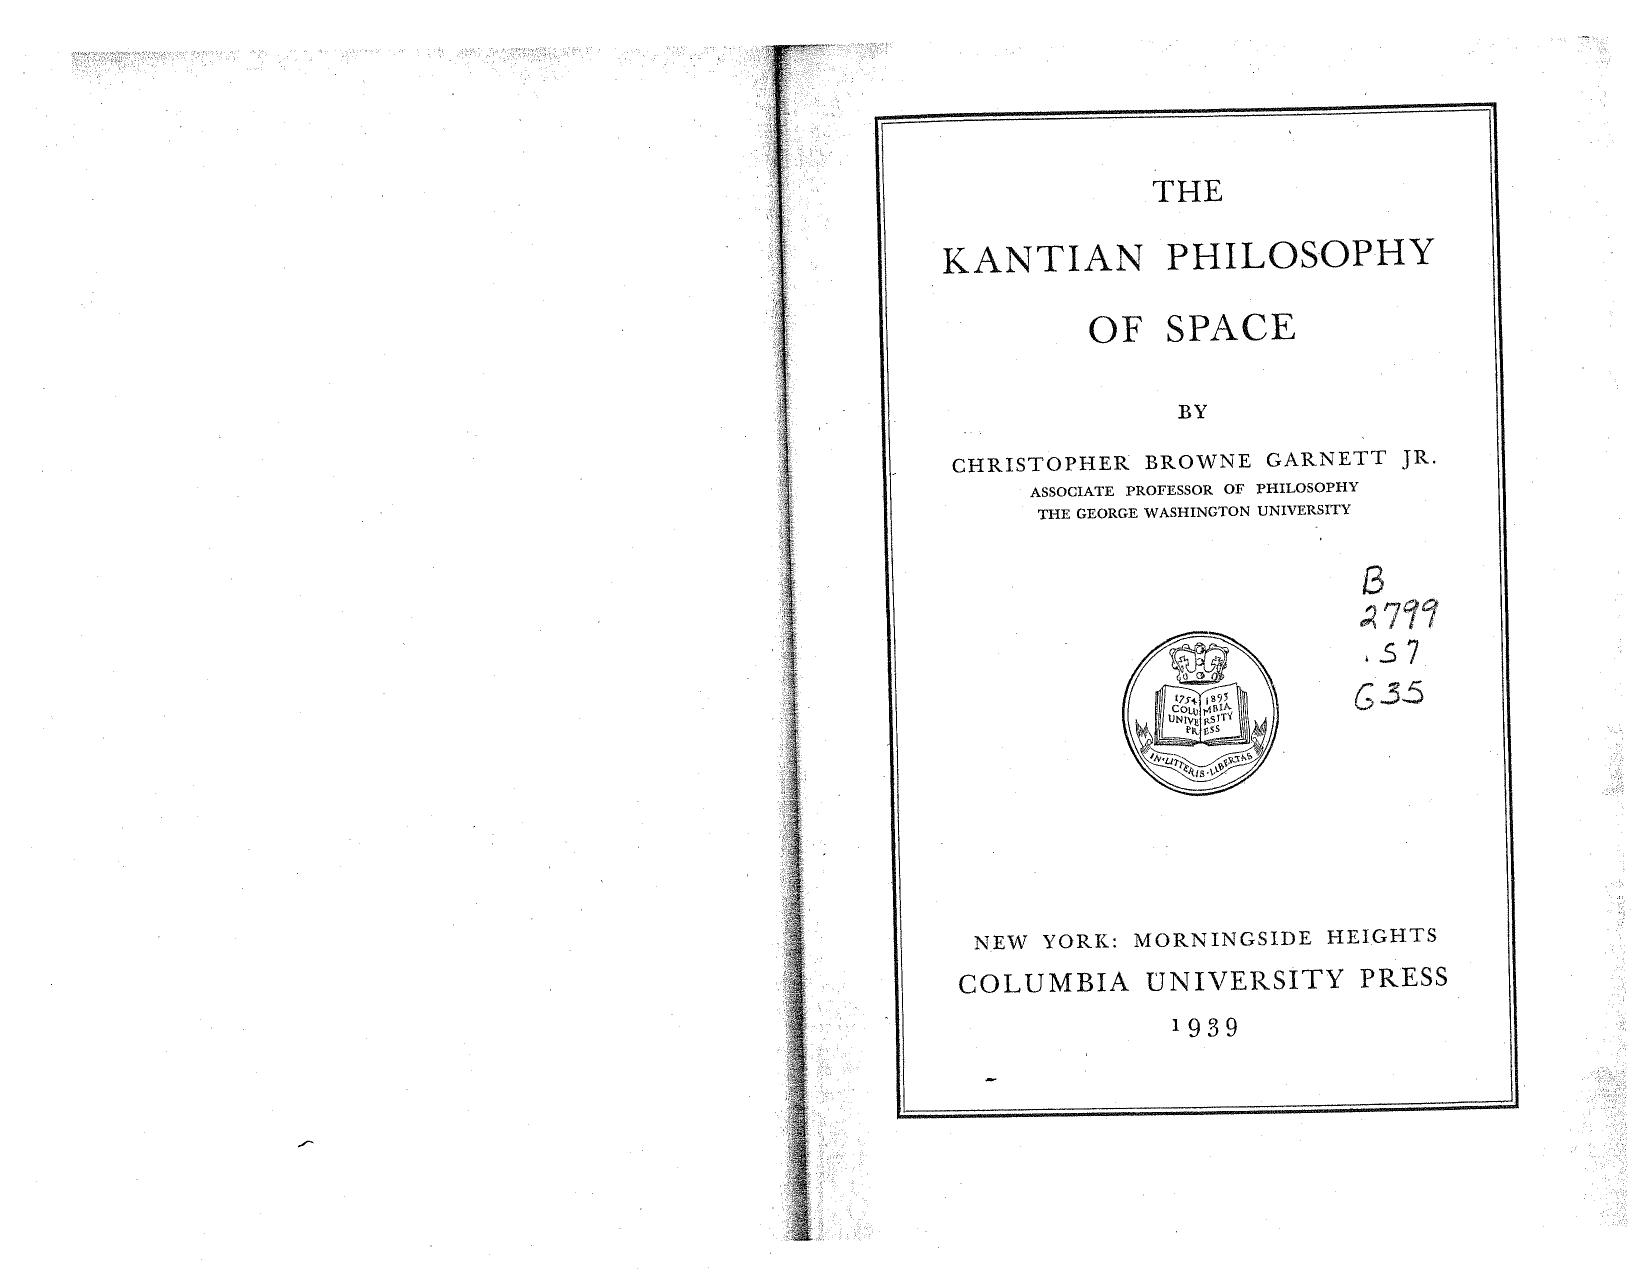 The Kantian Philosophy of Space